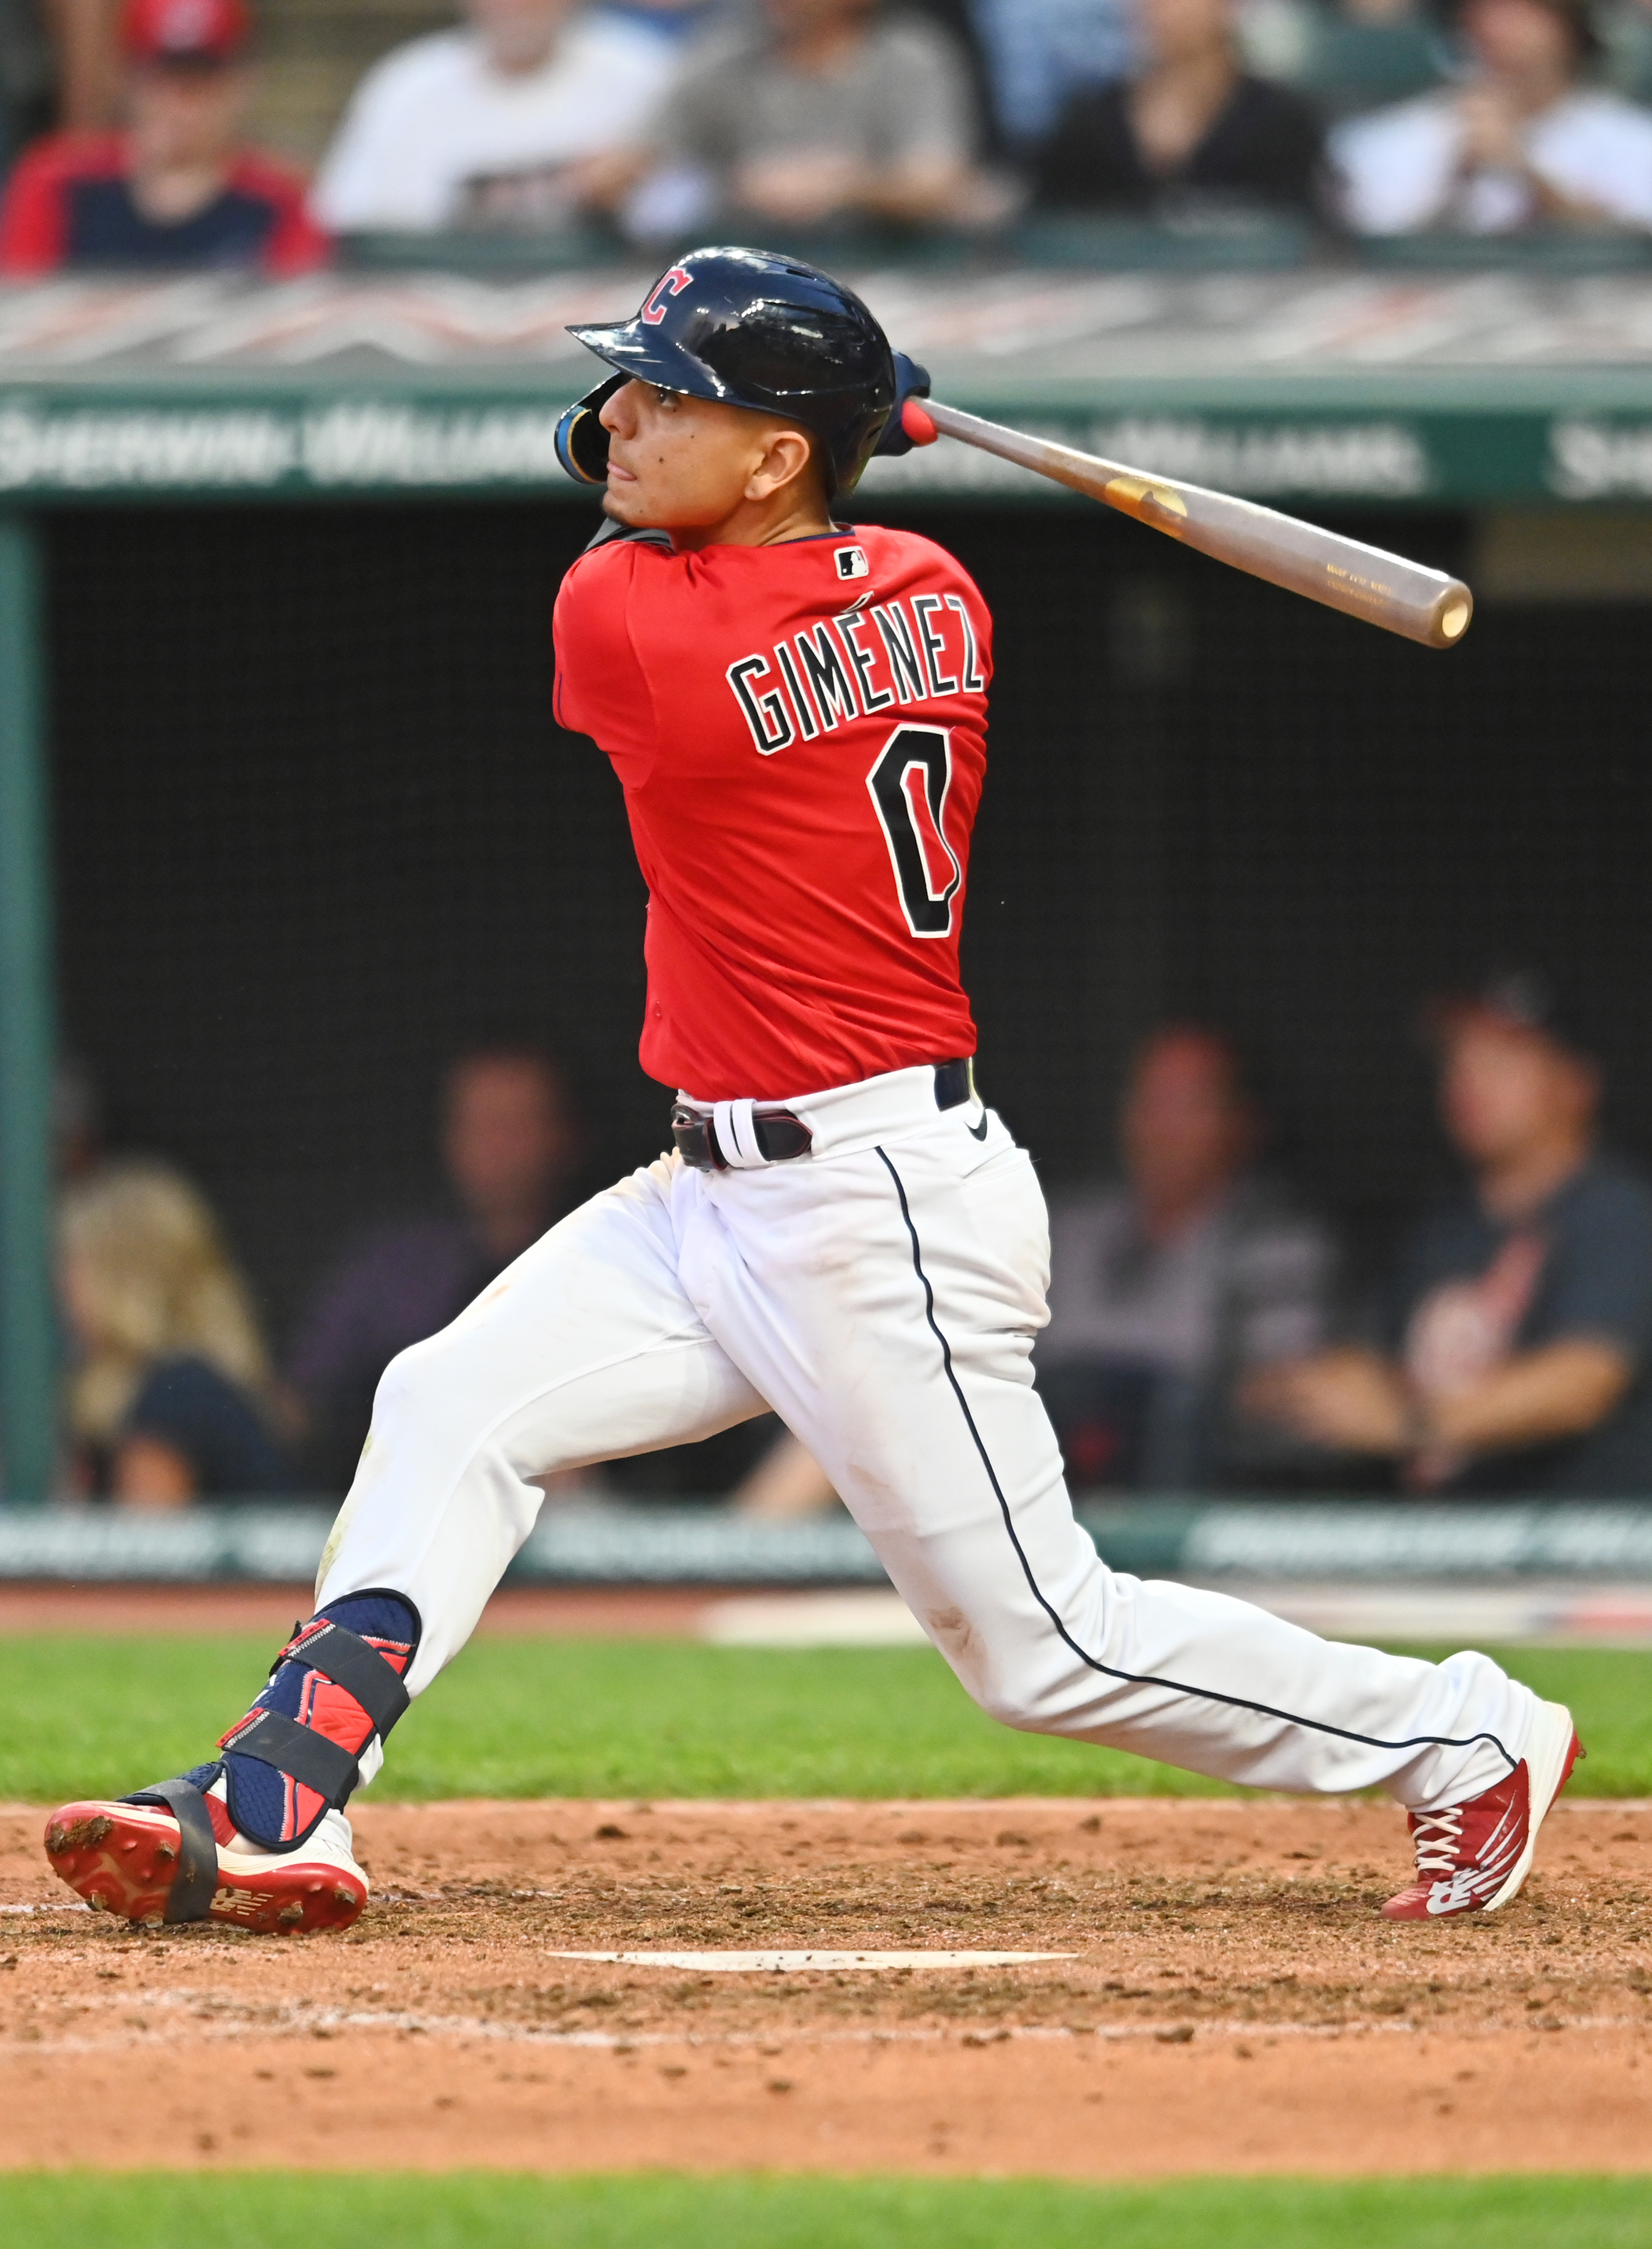 Could Gimenez's Breakout Prompt A Rosario Trade? - MLB Trade Rumors